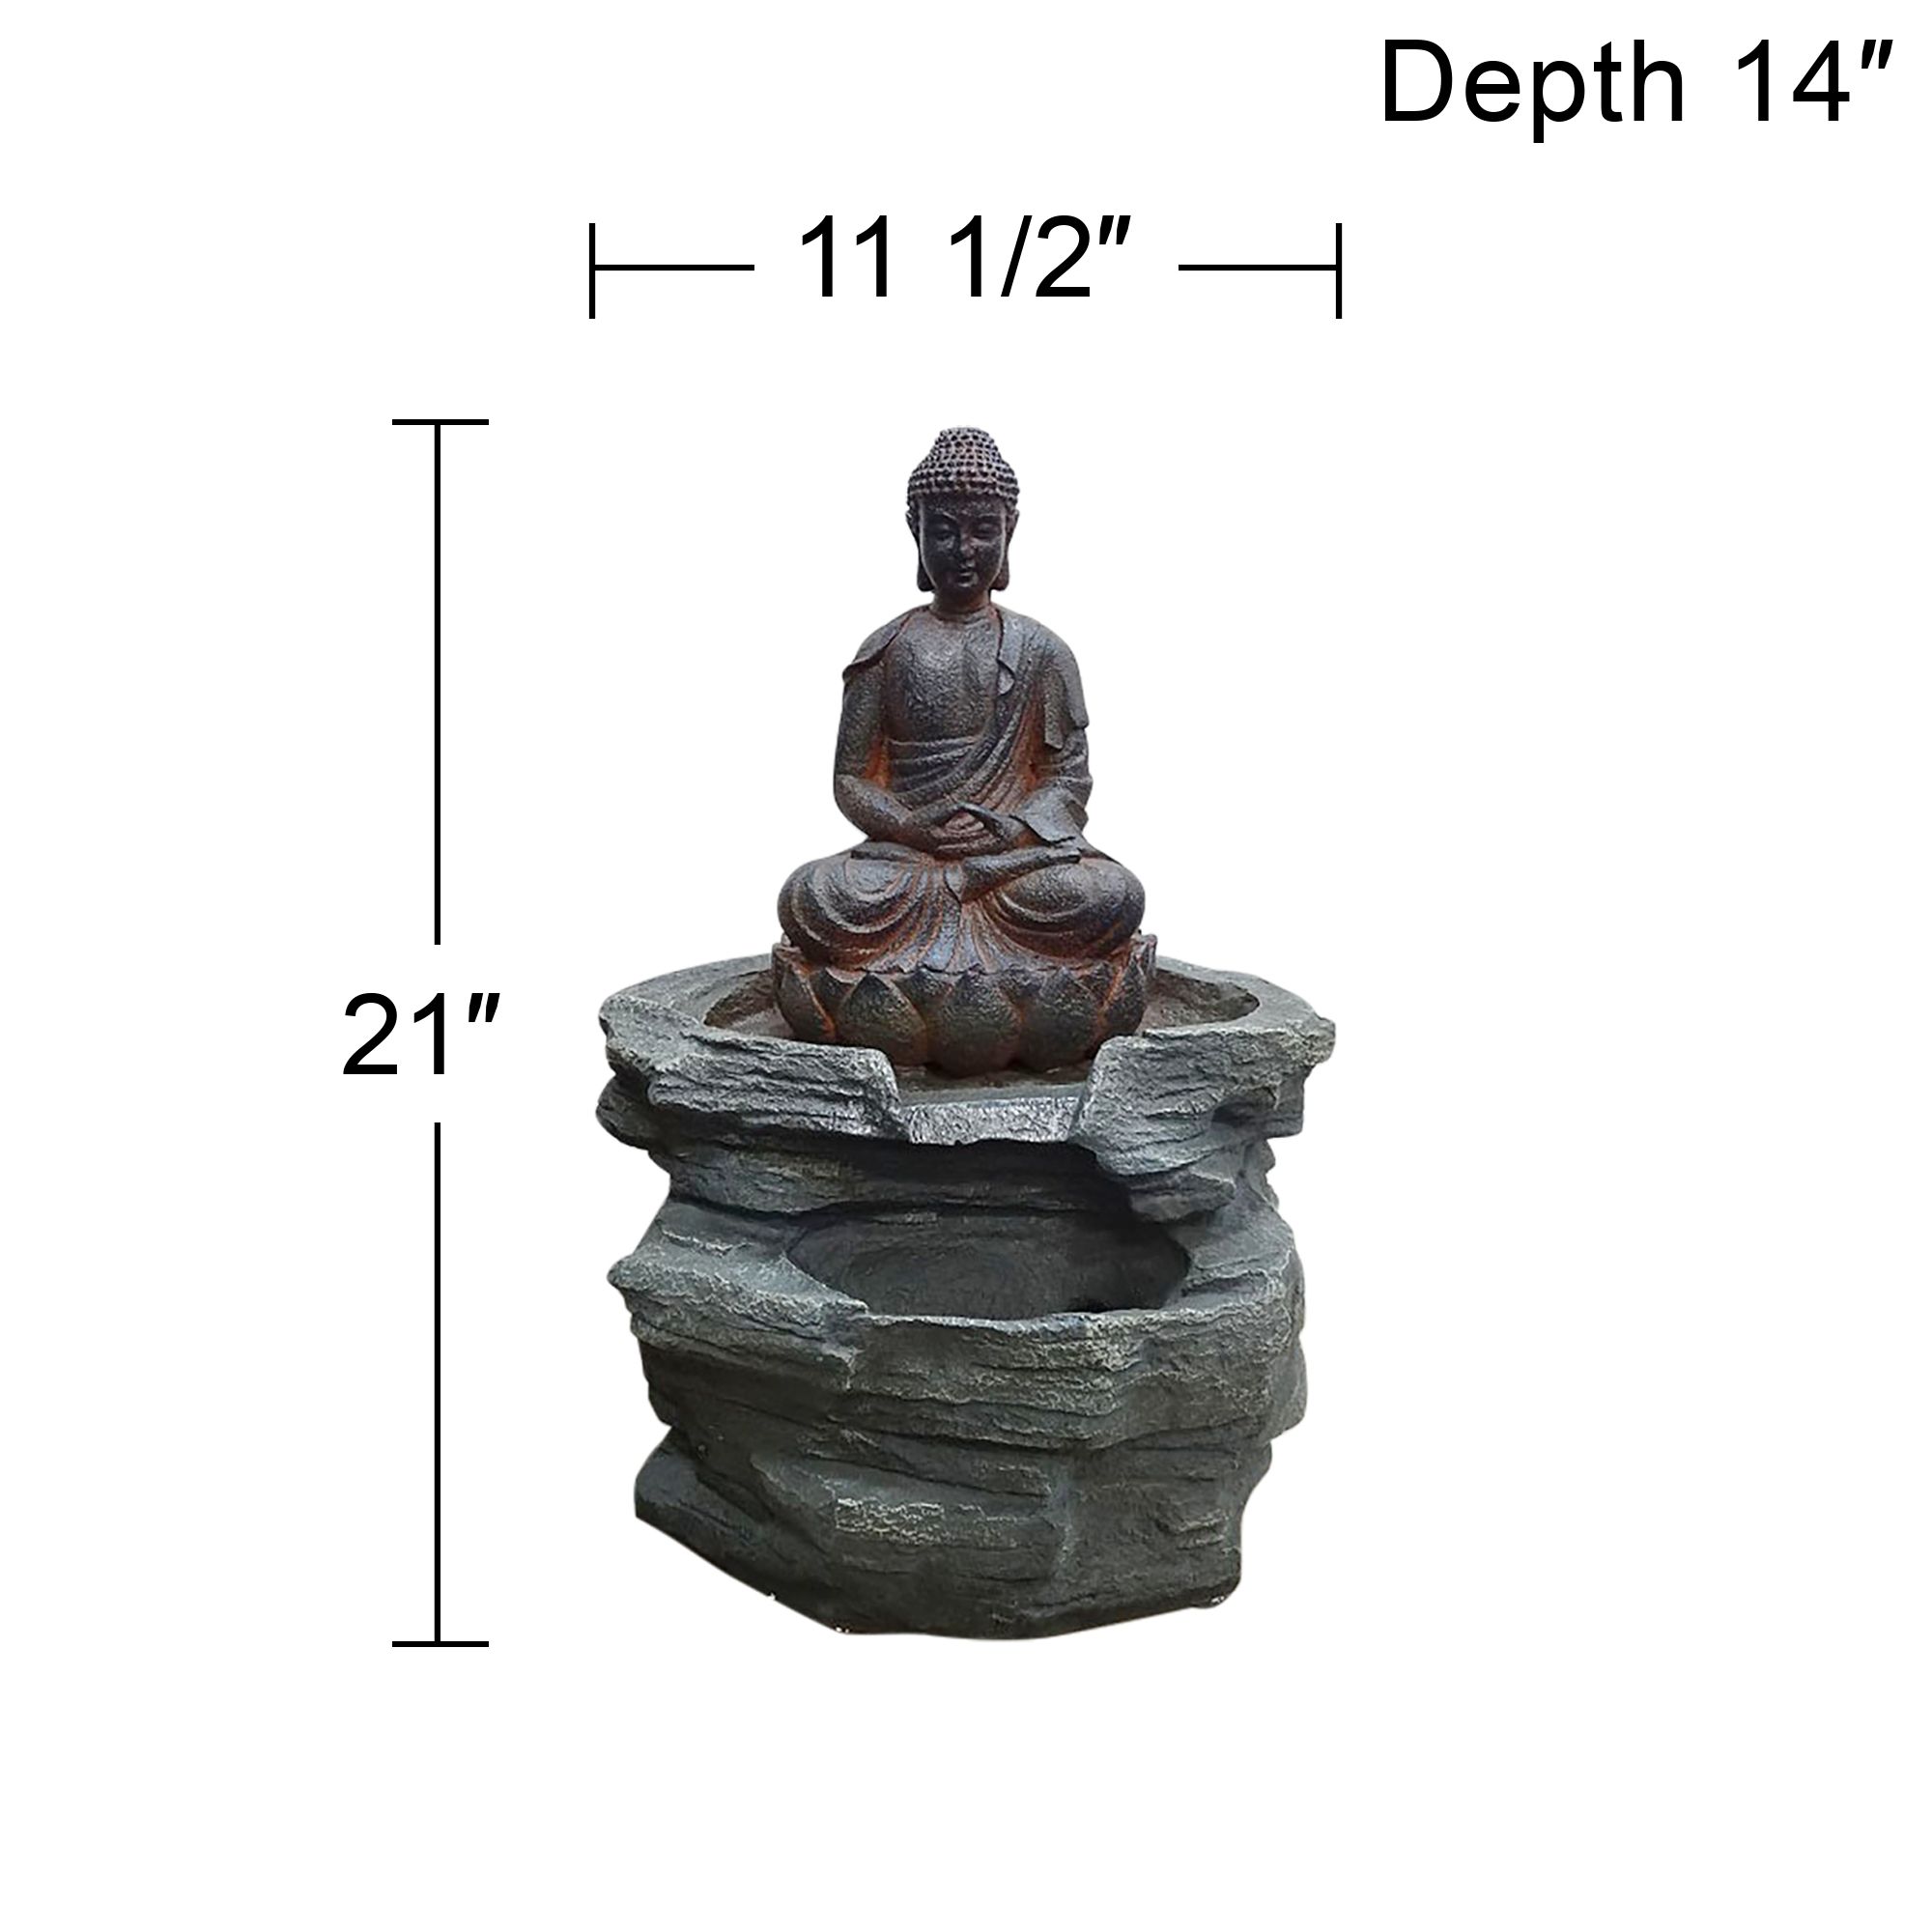 John Timberland Rustic Zen Buddha Outdoor Floor Water Fountain with Light LED 21" High Sitting for Yard Garden Patio Deck Home - image 5 of 8